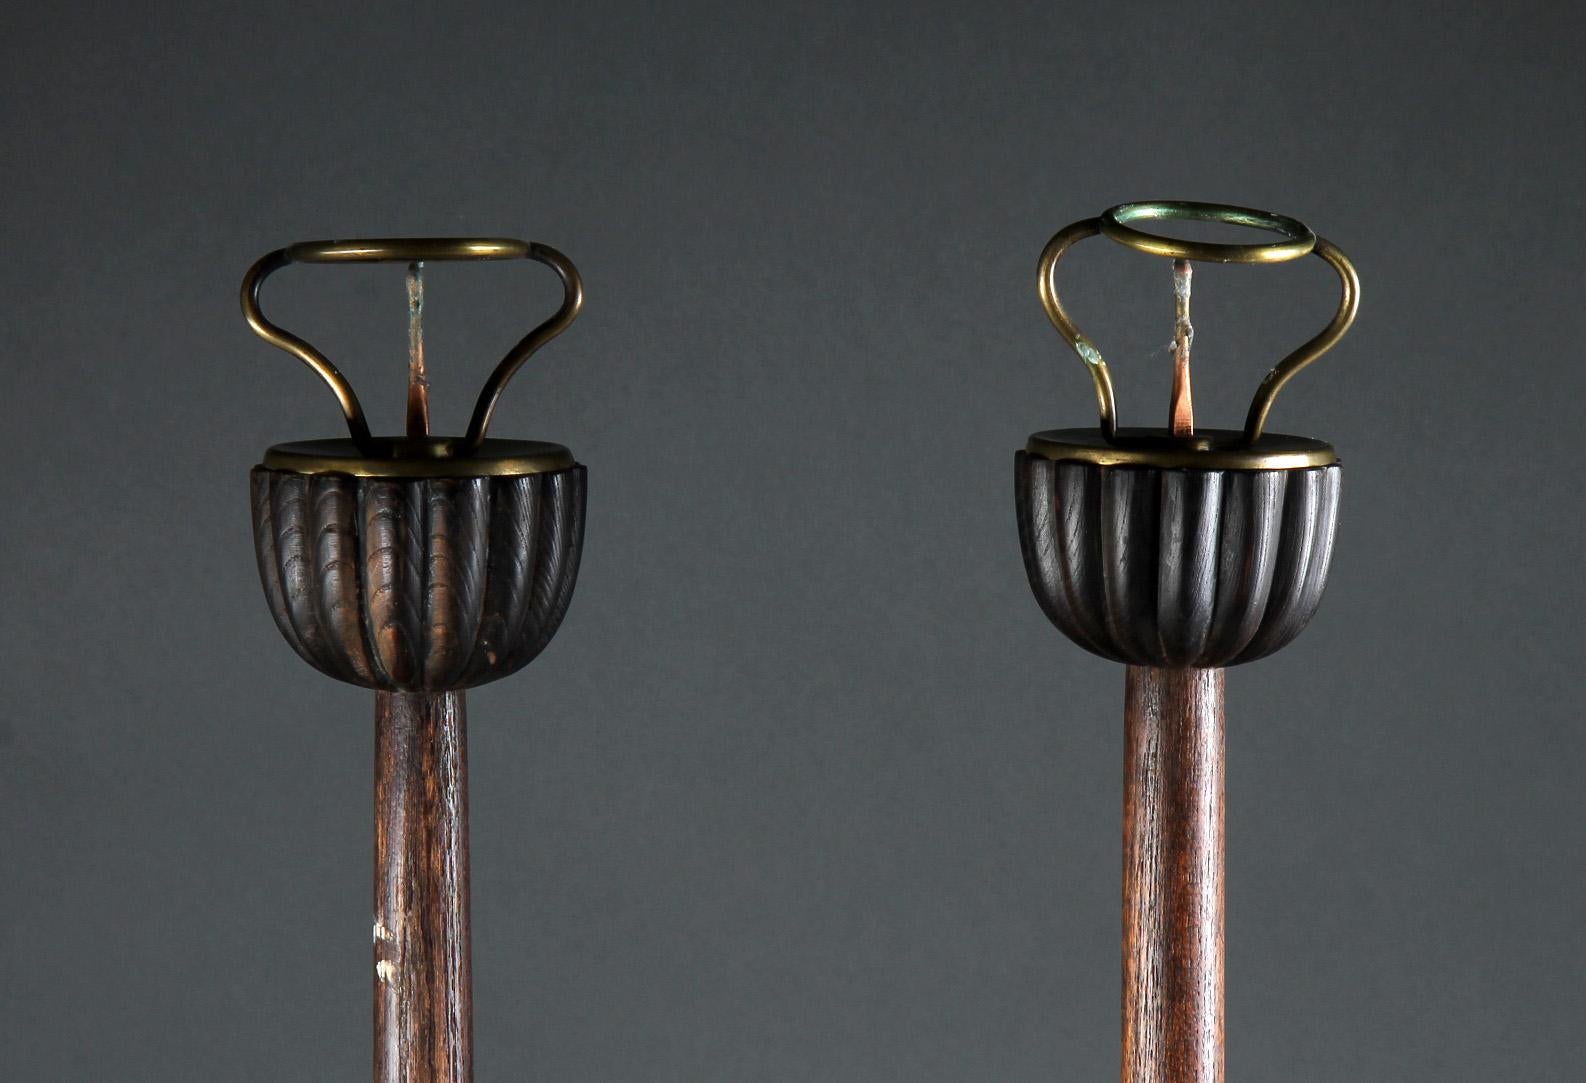 Pair of Shokudai candle holders made of stained wood during the Meiji period (1868-1912) in Japan. Includes original box as pictured. 

Candle holders H. 71 cm. 
Wooden box H. 25 L. 74 D. 42 cm.
 